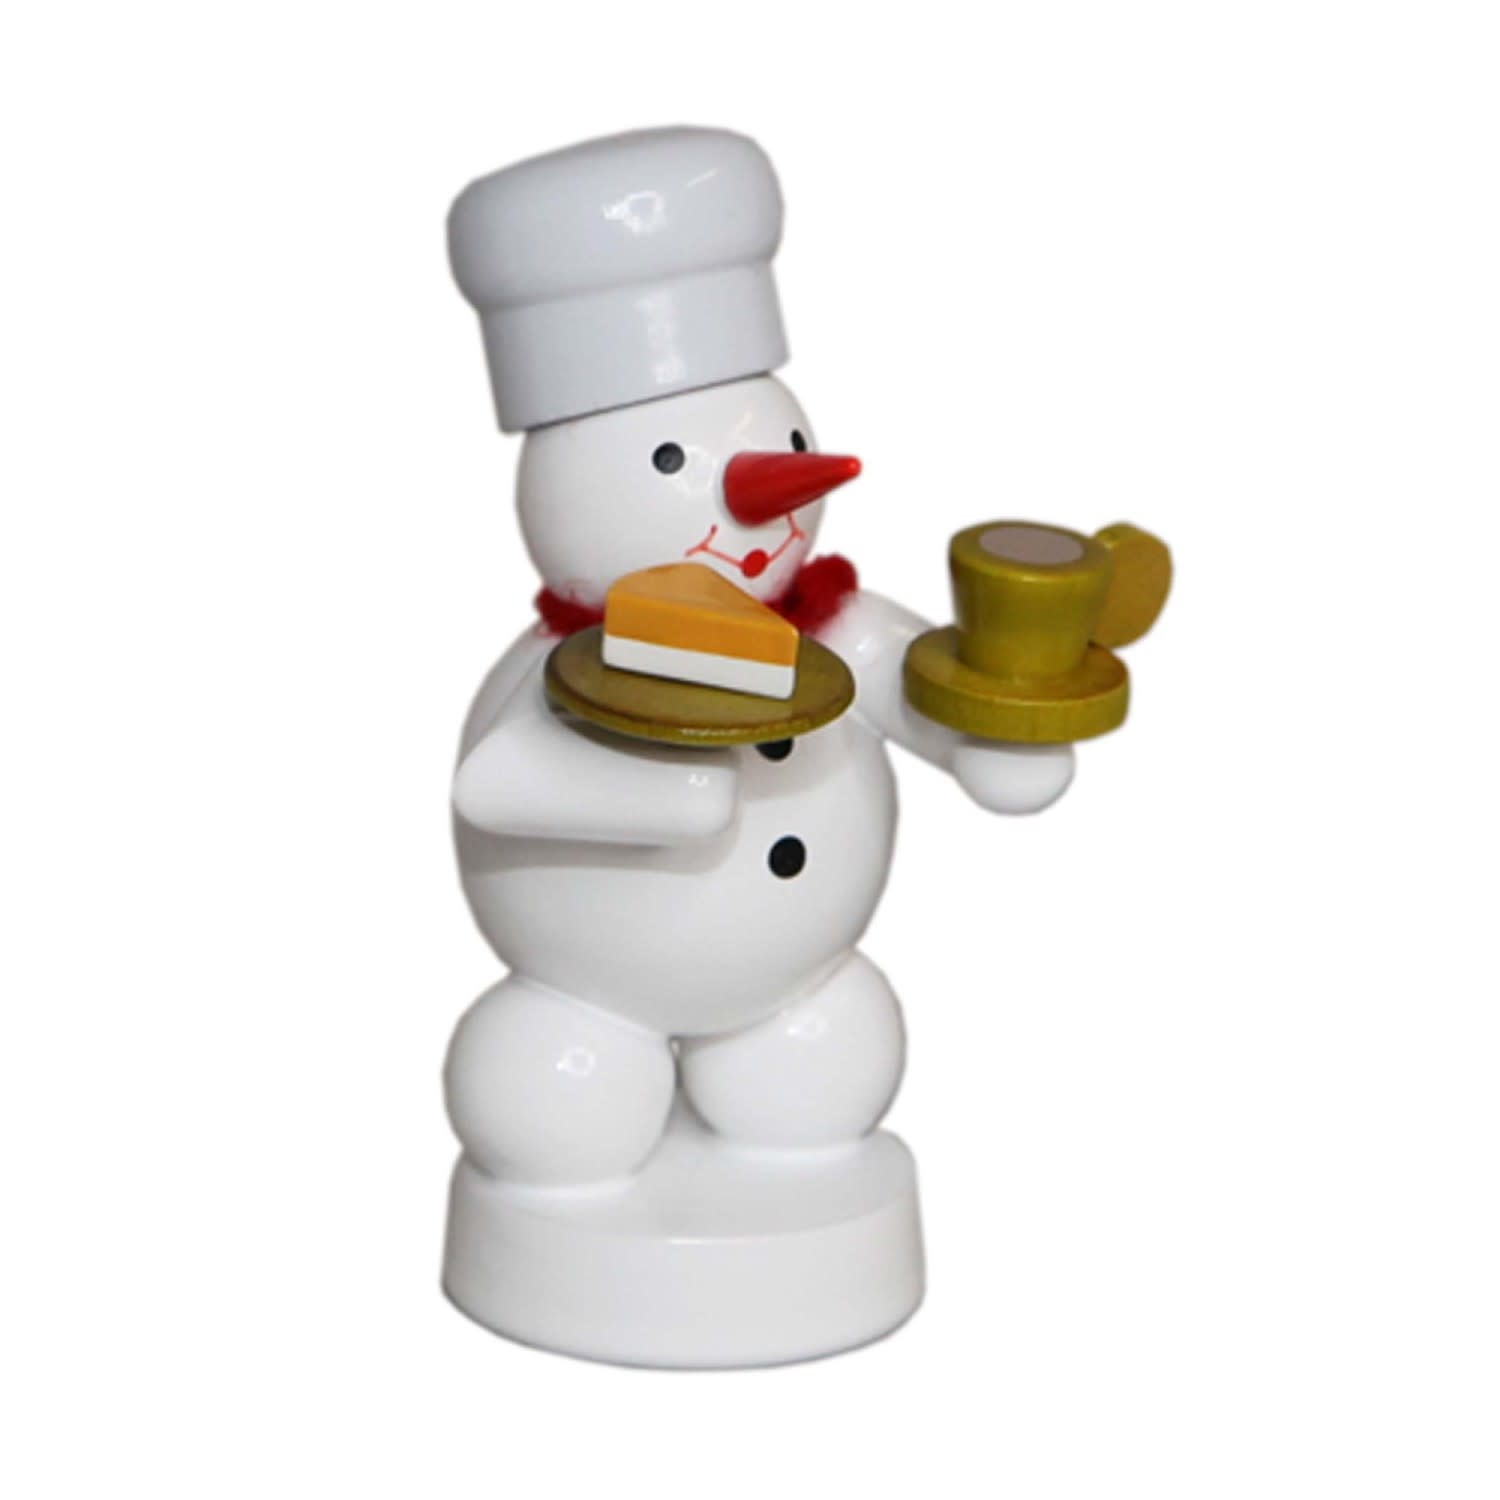 Zenker 001-200-04-2 Snowman Baker With Coffee and Cake  3 inches